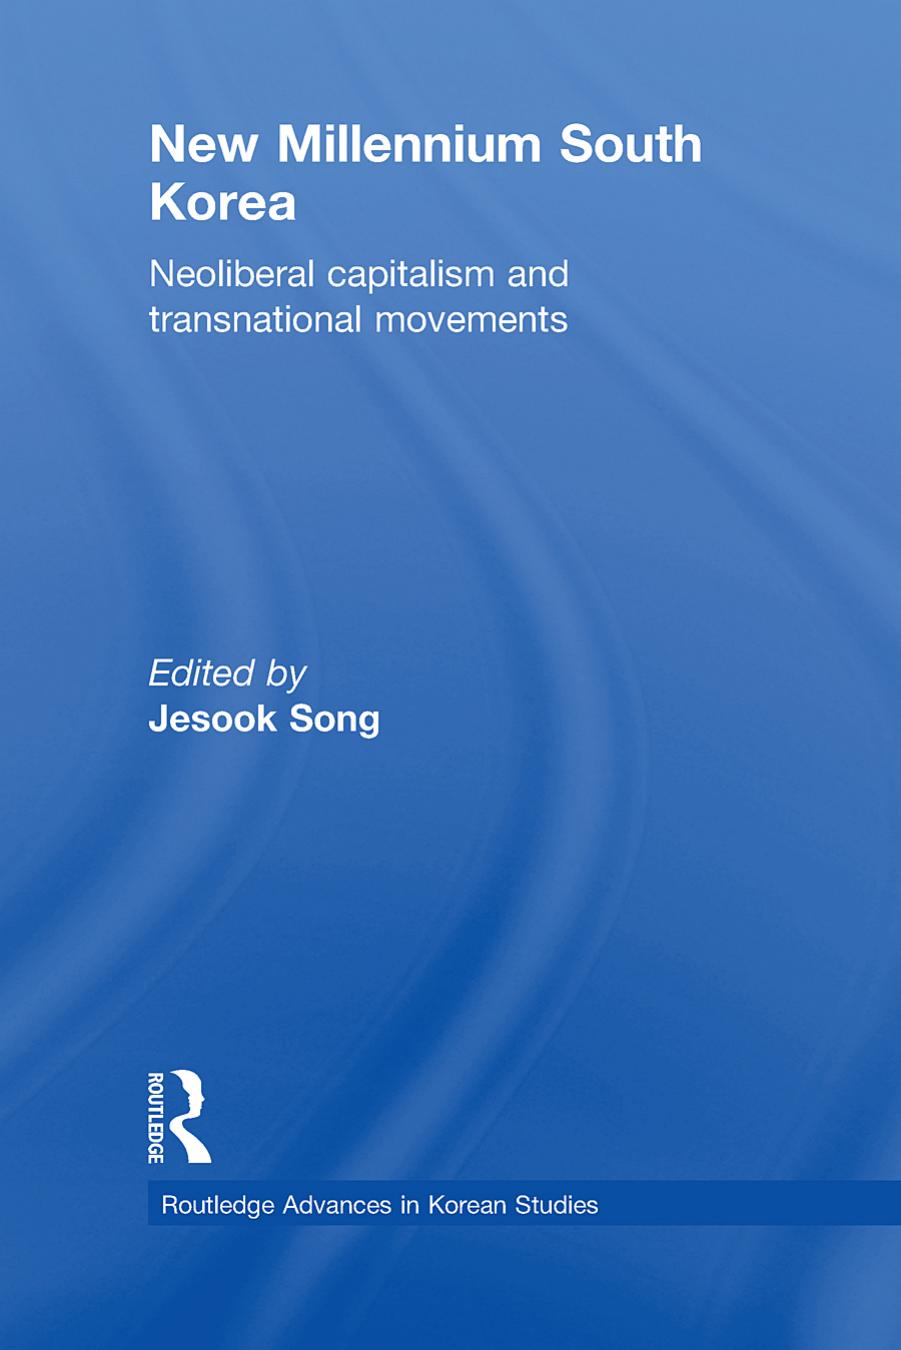 New Millennium South Korea: Neoliberal Capitalism and Transnational Movements (Routledge Advances in Korean Studies) 1st Edition  by Jesook Song (edt)